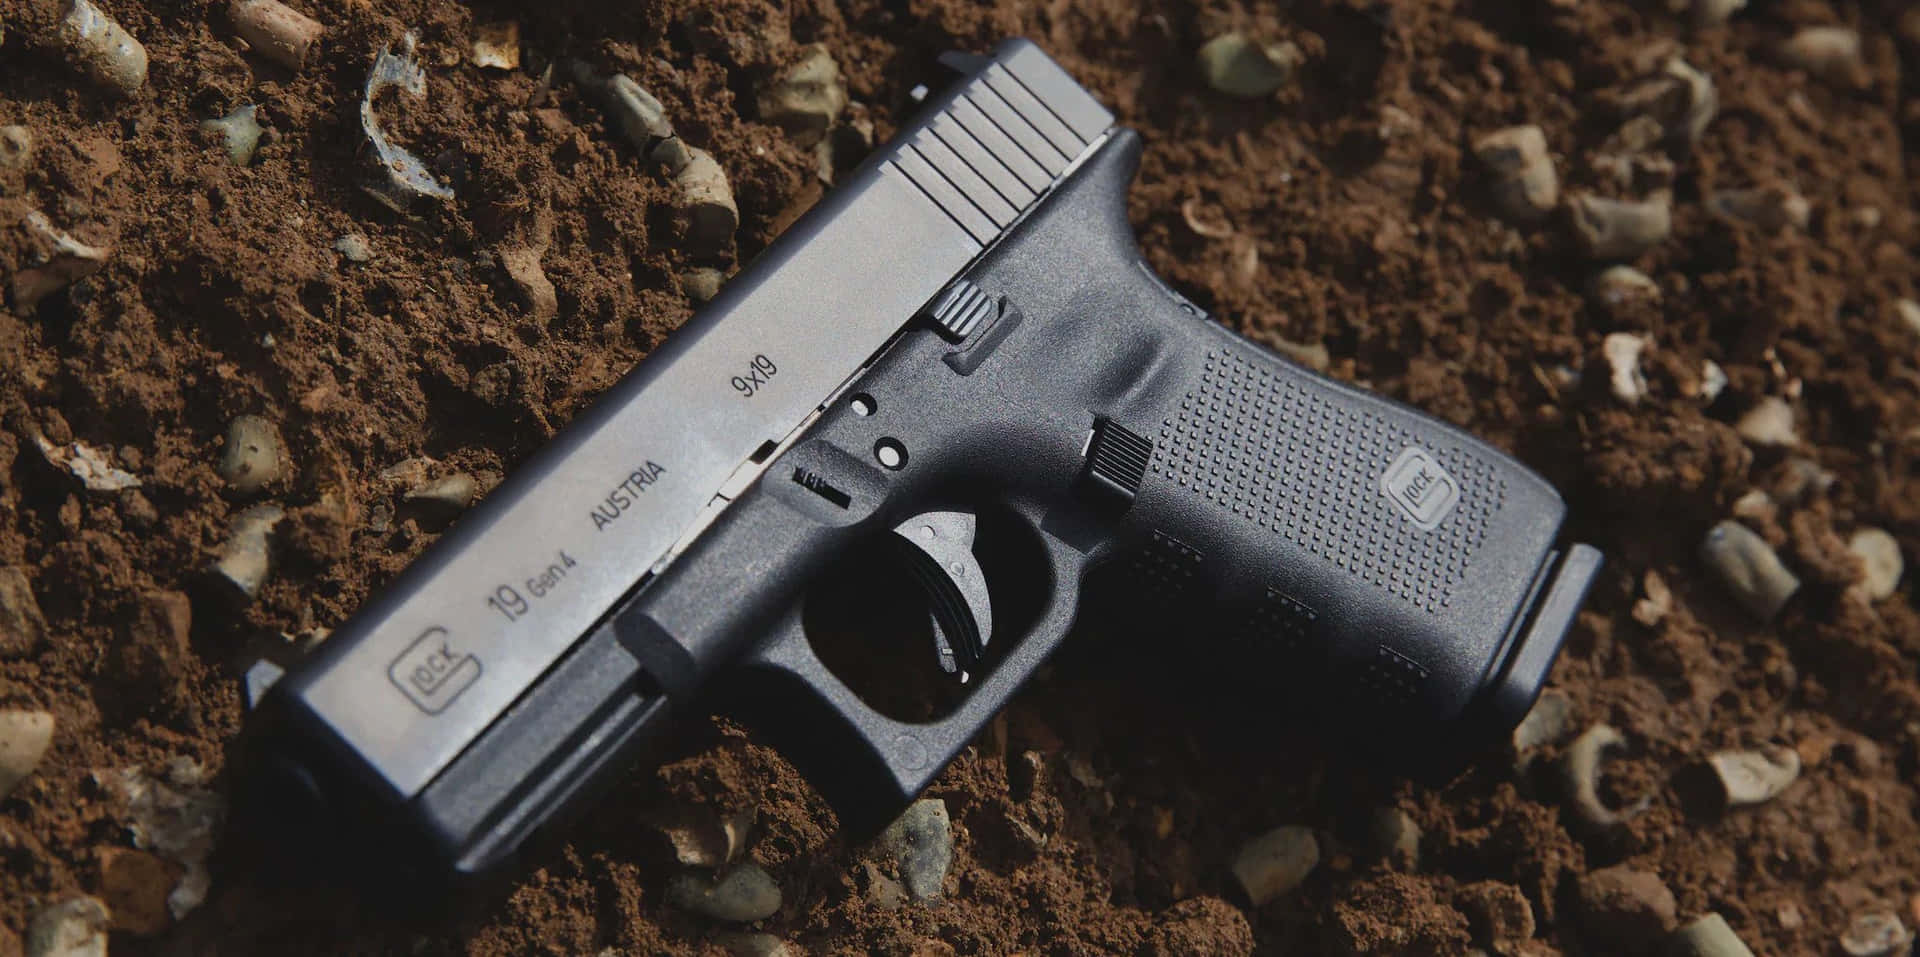 A close-up, detailed image of the popular Glock 19 pistol